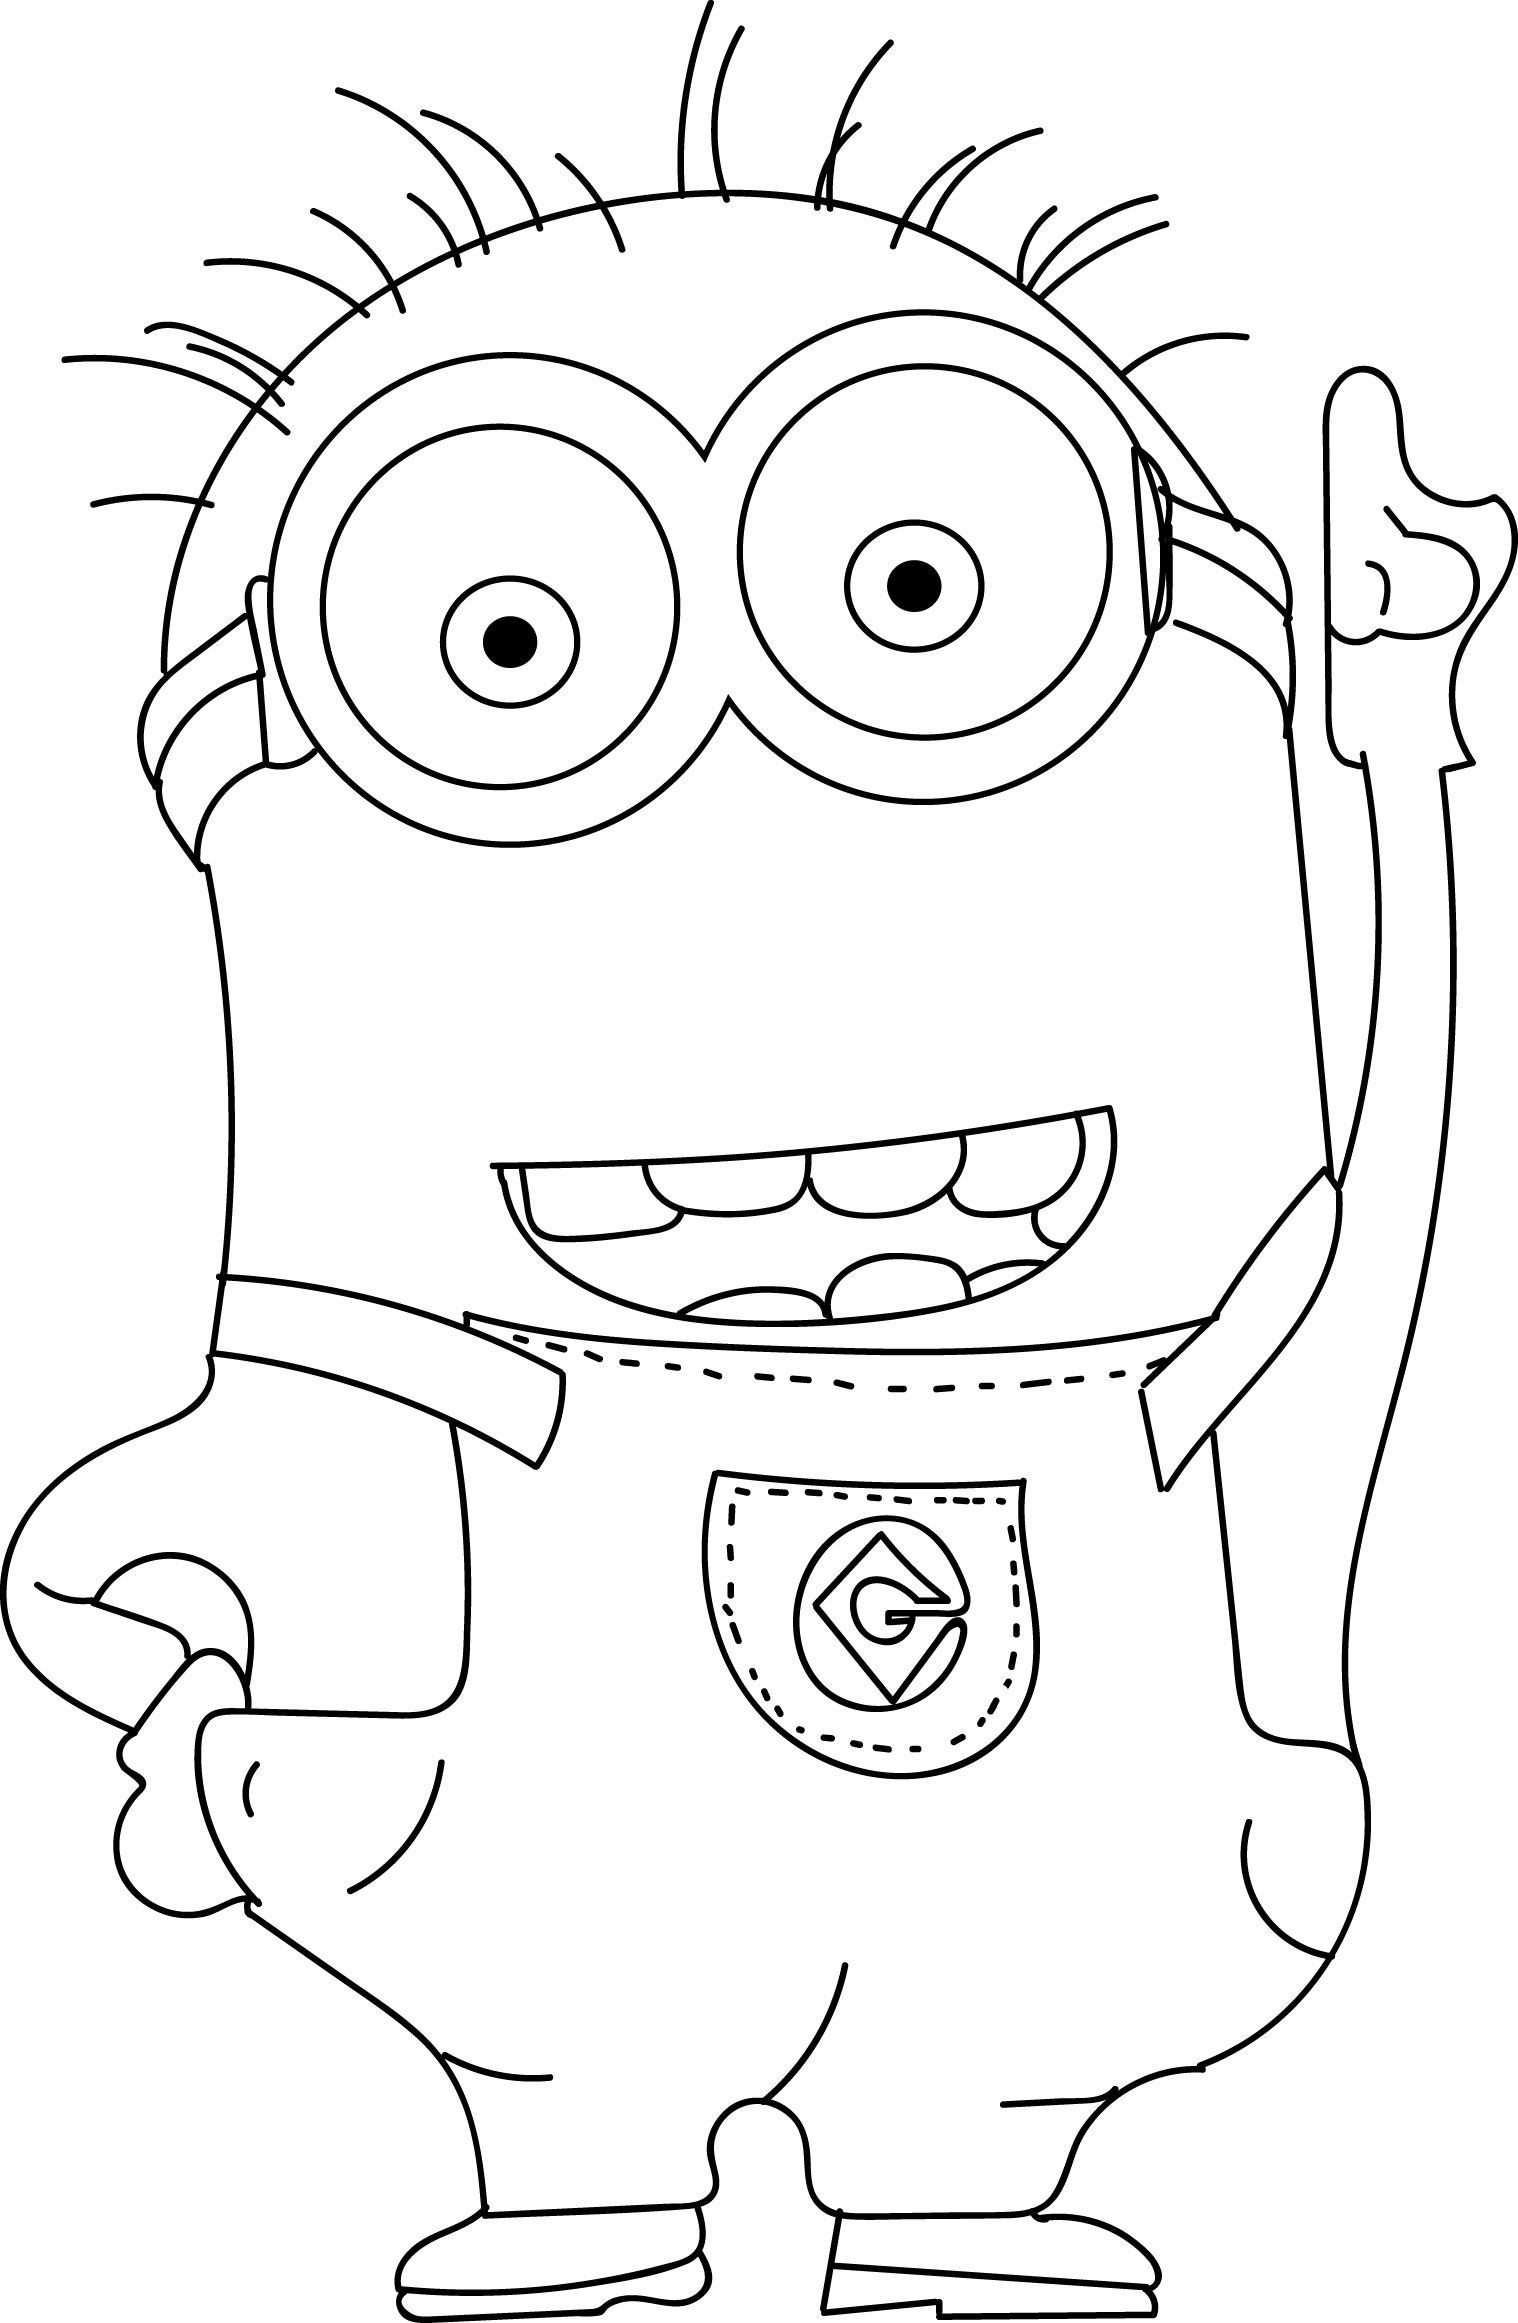 Coloring Pages For Kids Minion
 cool Minions Coloring Pages Check more at